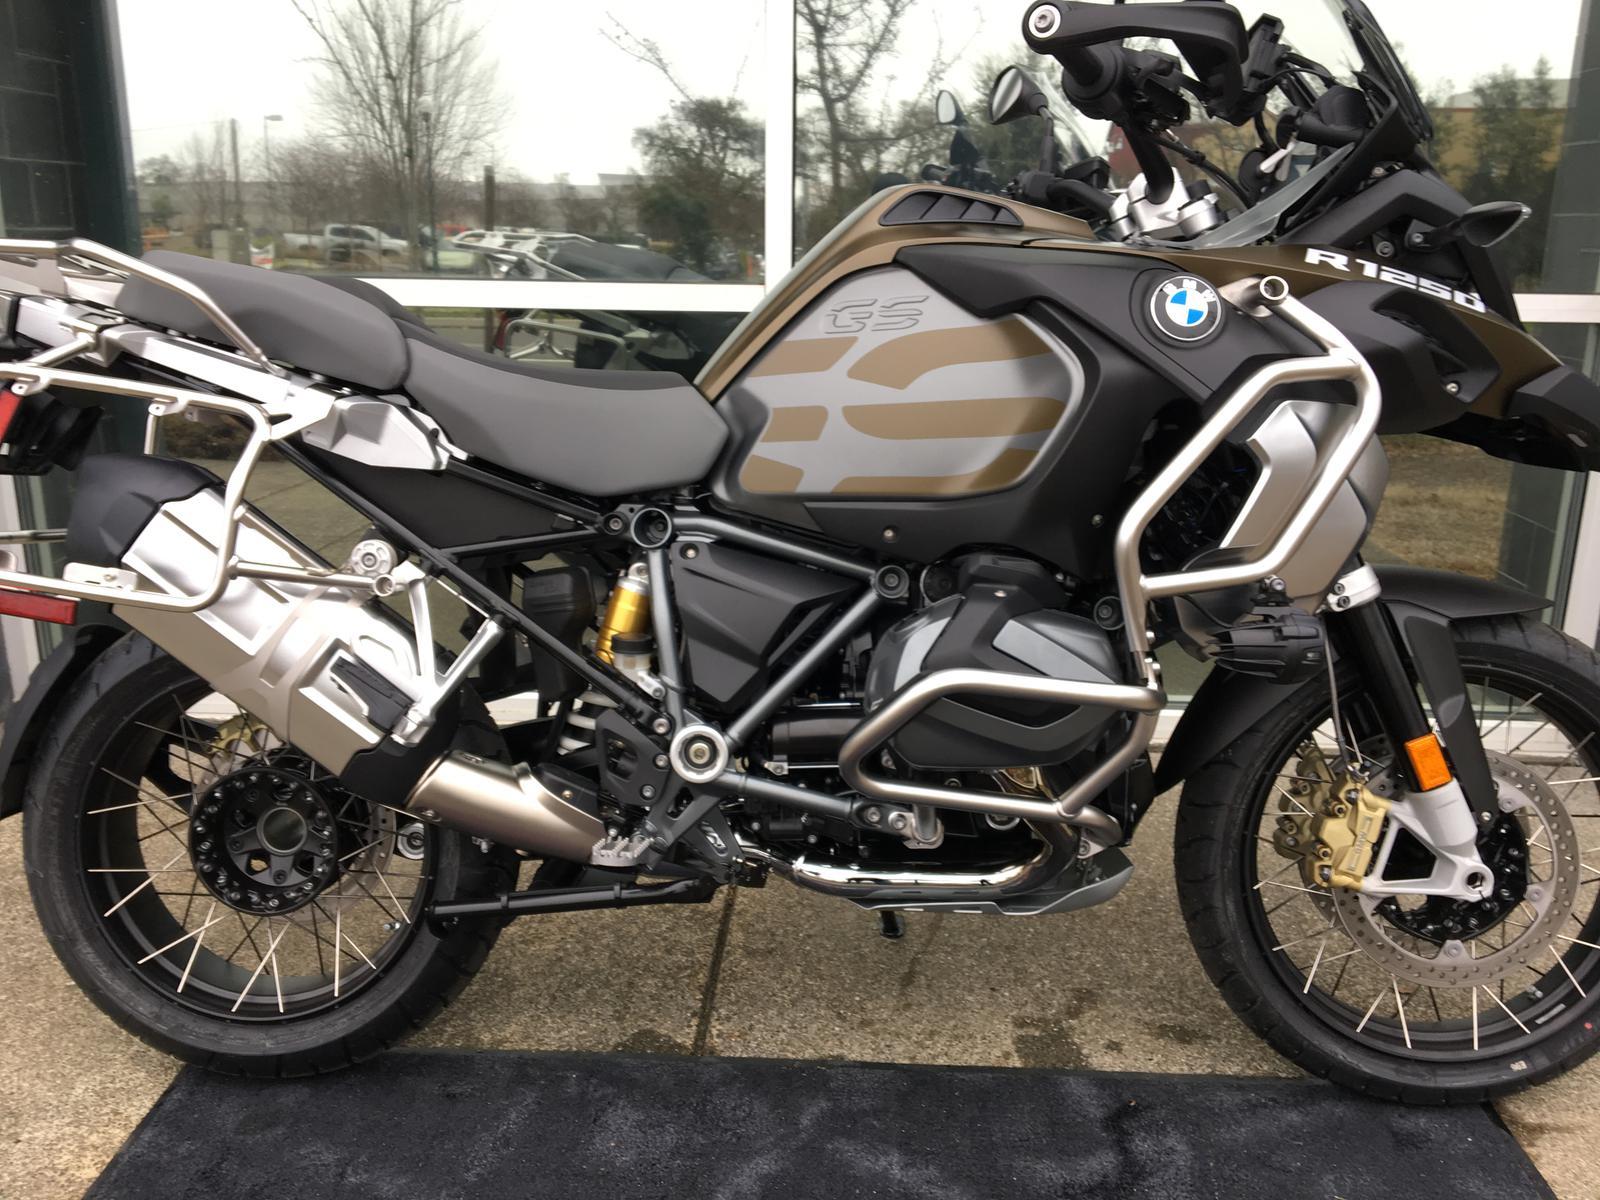 BMW R 1250 GS ADVENTURE In Windsor, CA. Euro Cycle